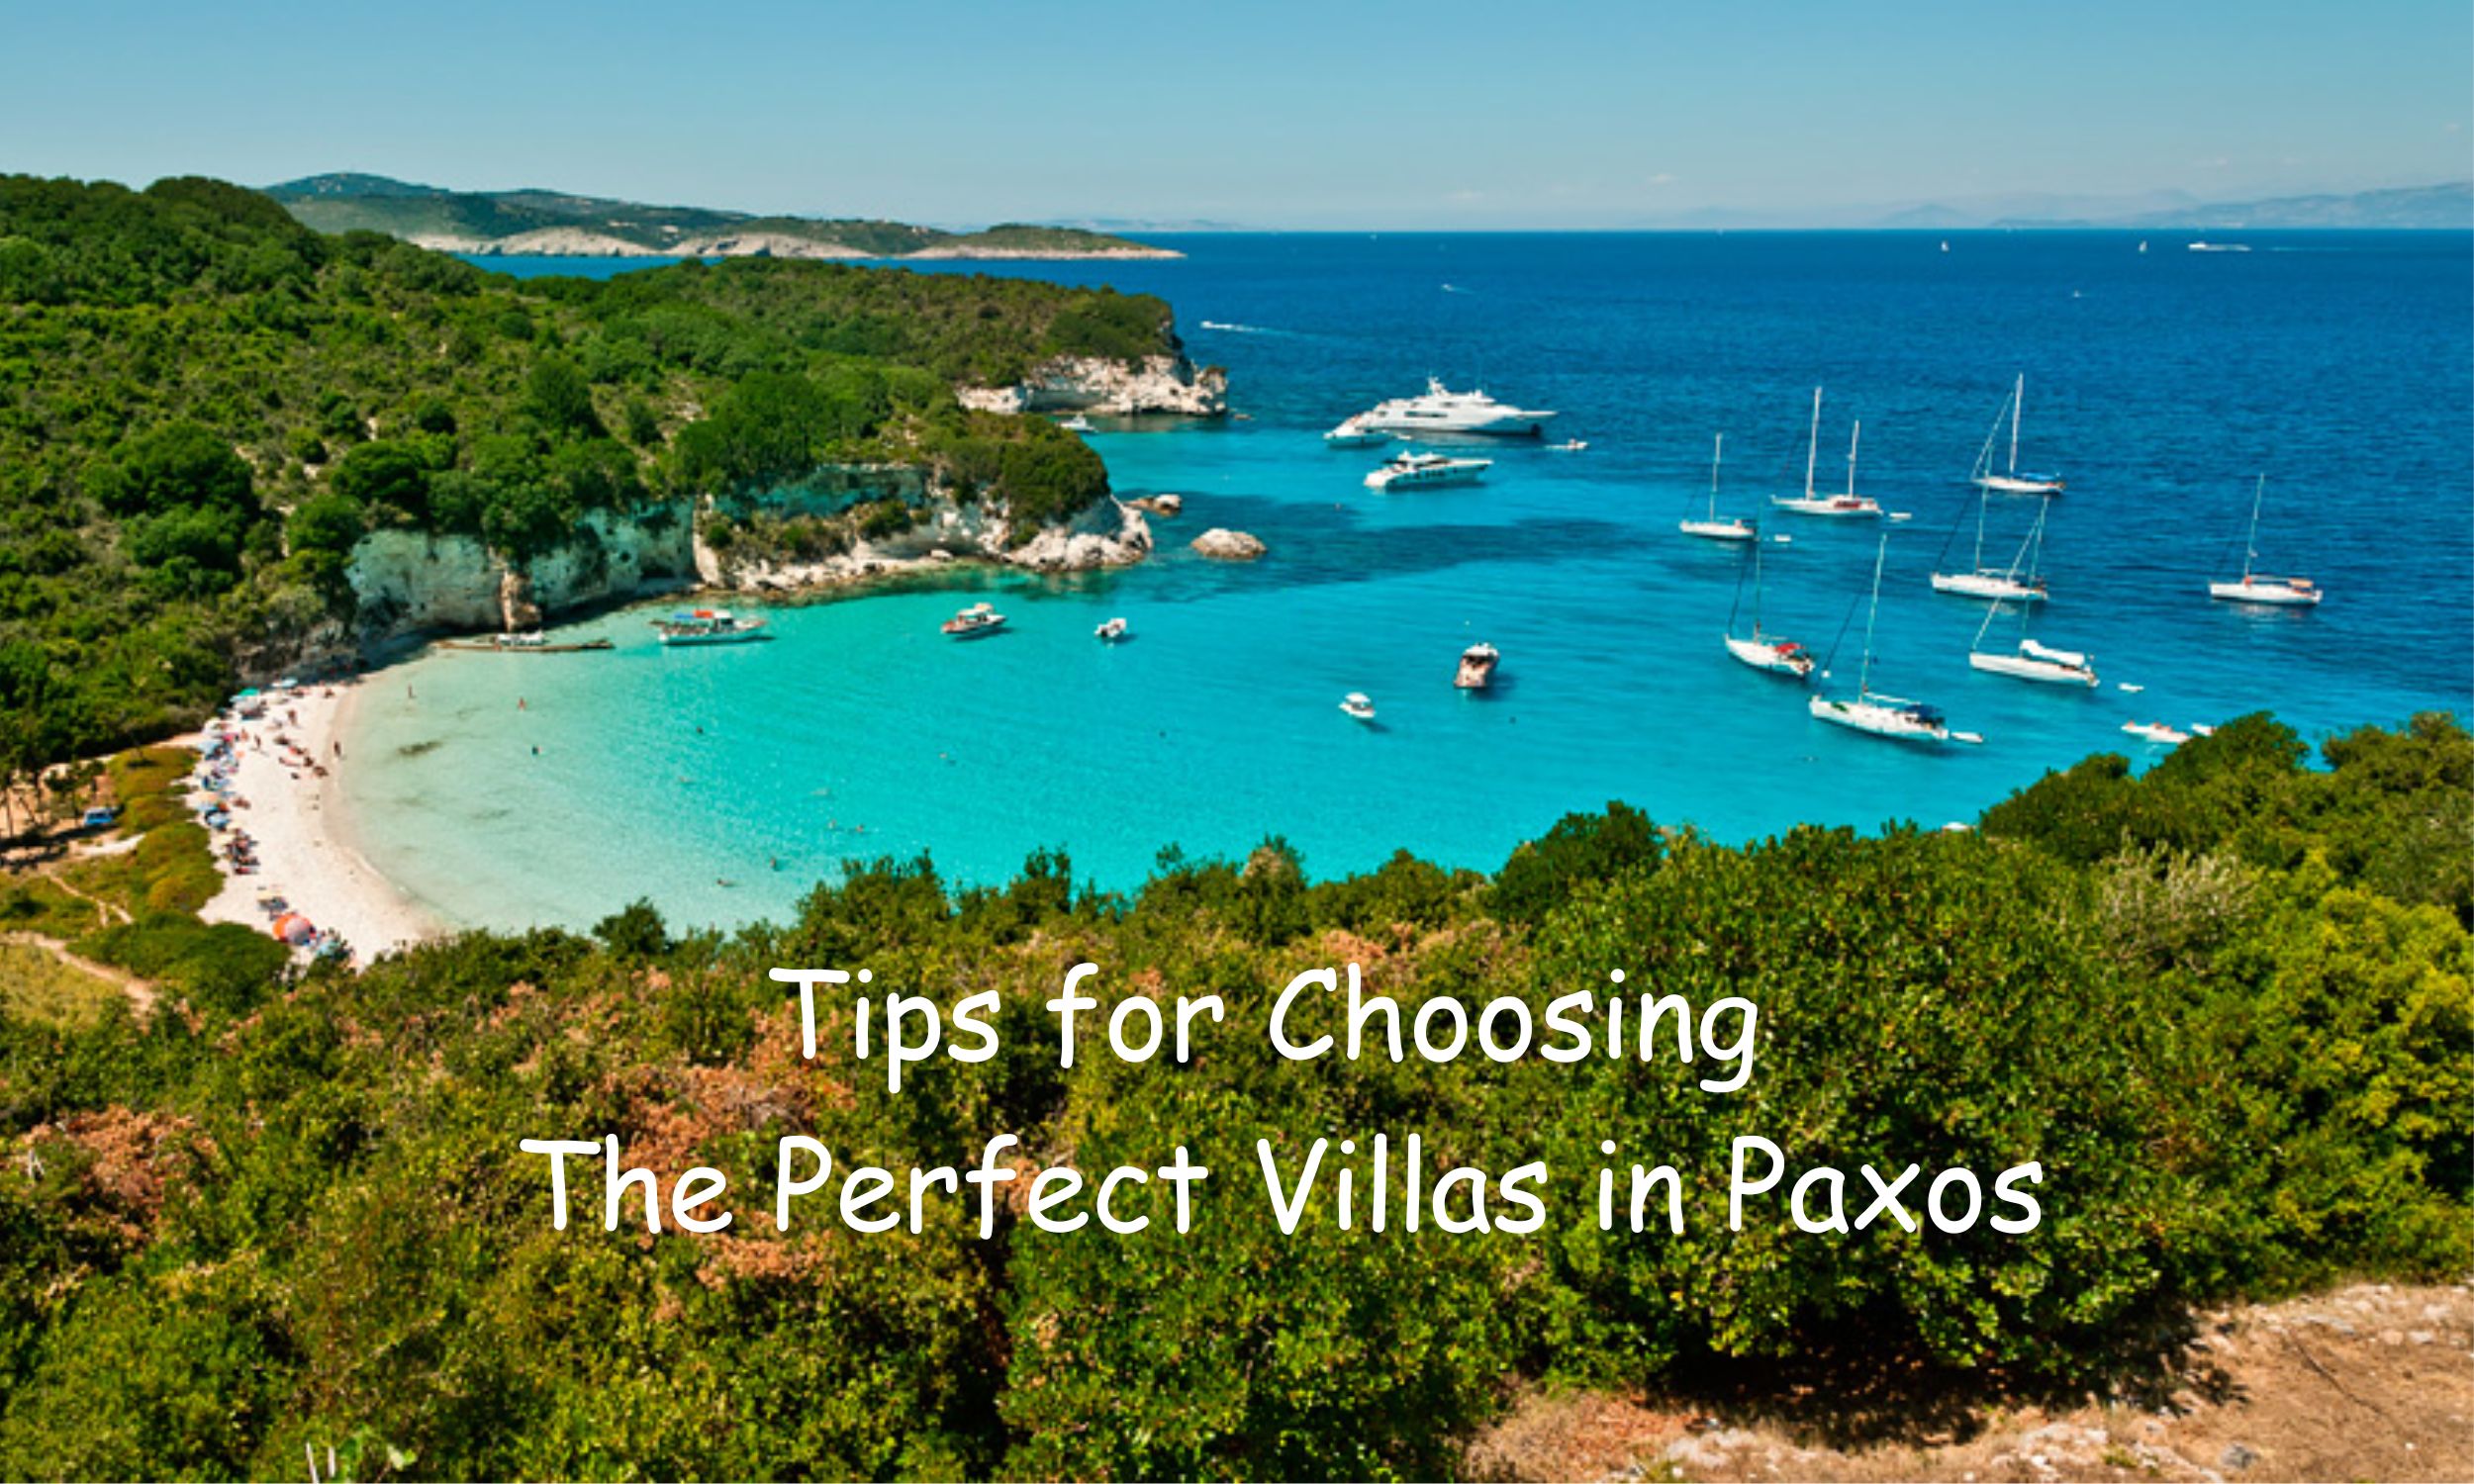 Tips for Choosing the Perfect Villas in Paxos